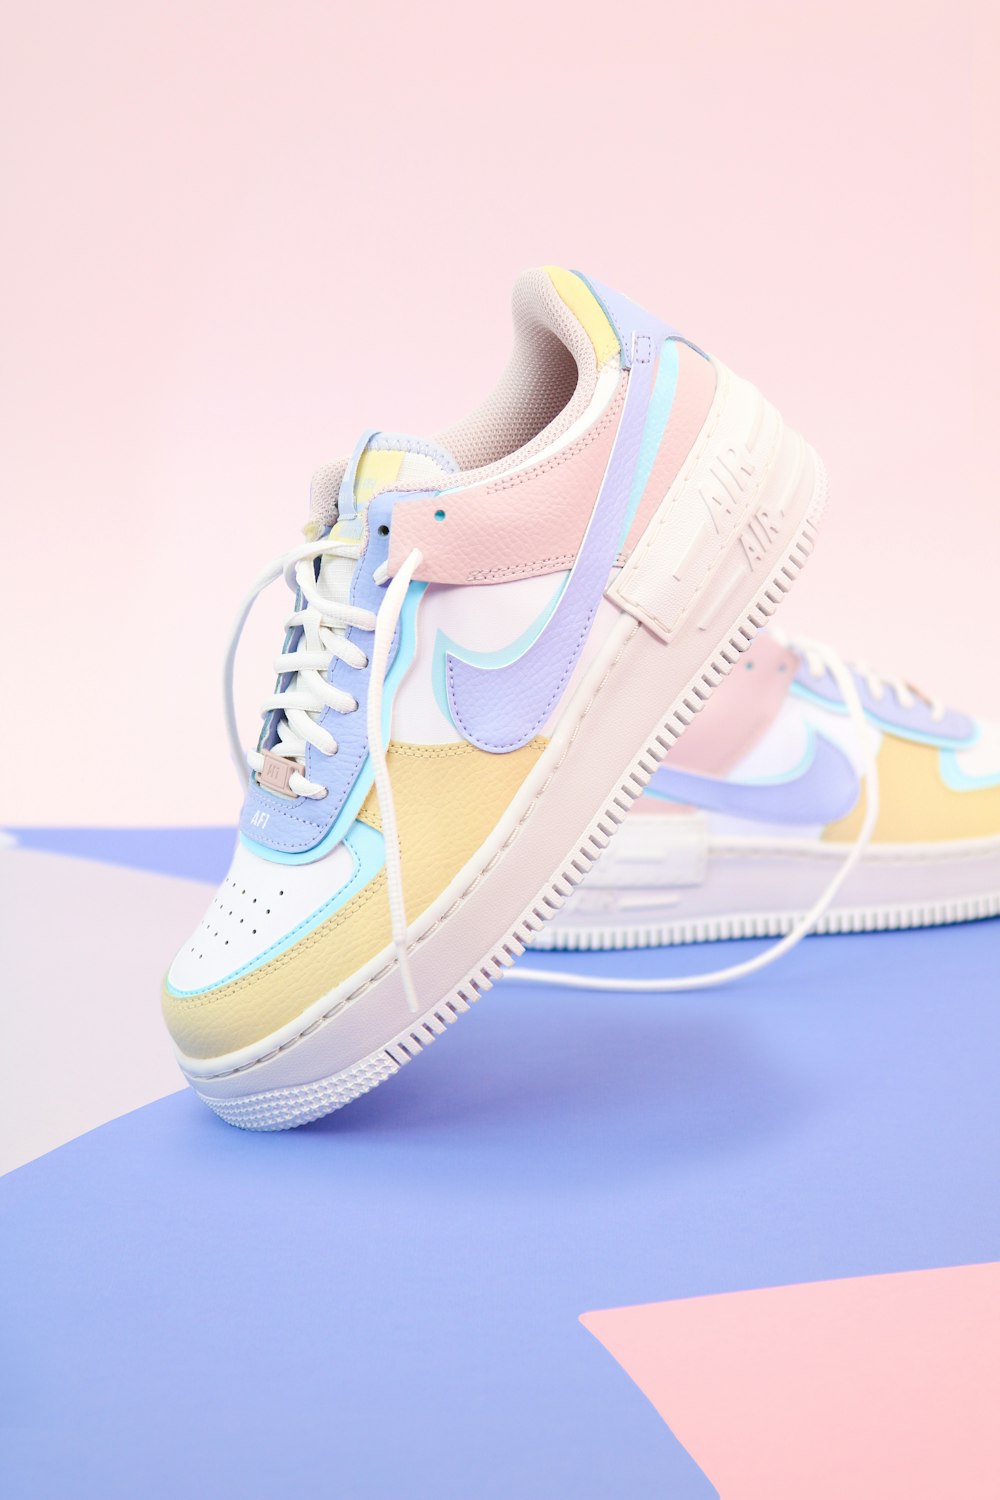 Perceptueel Ideaal Conform Nike Air Force 1 Pictures | Download Free Images on Unsplash